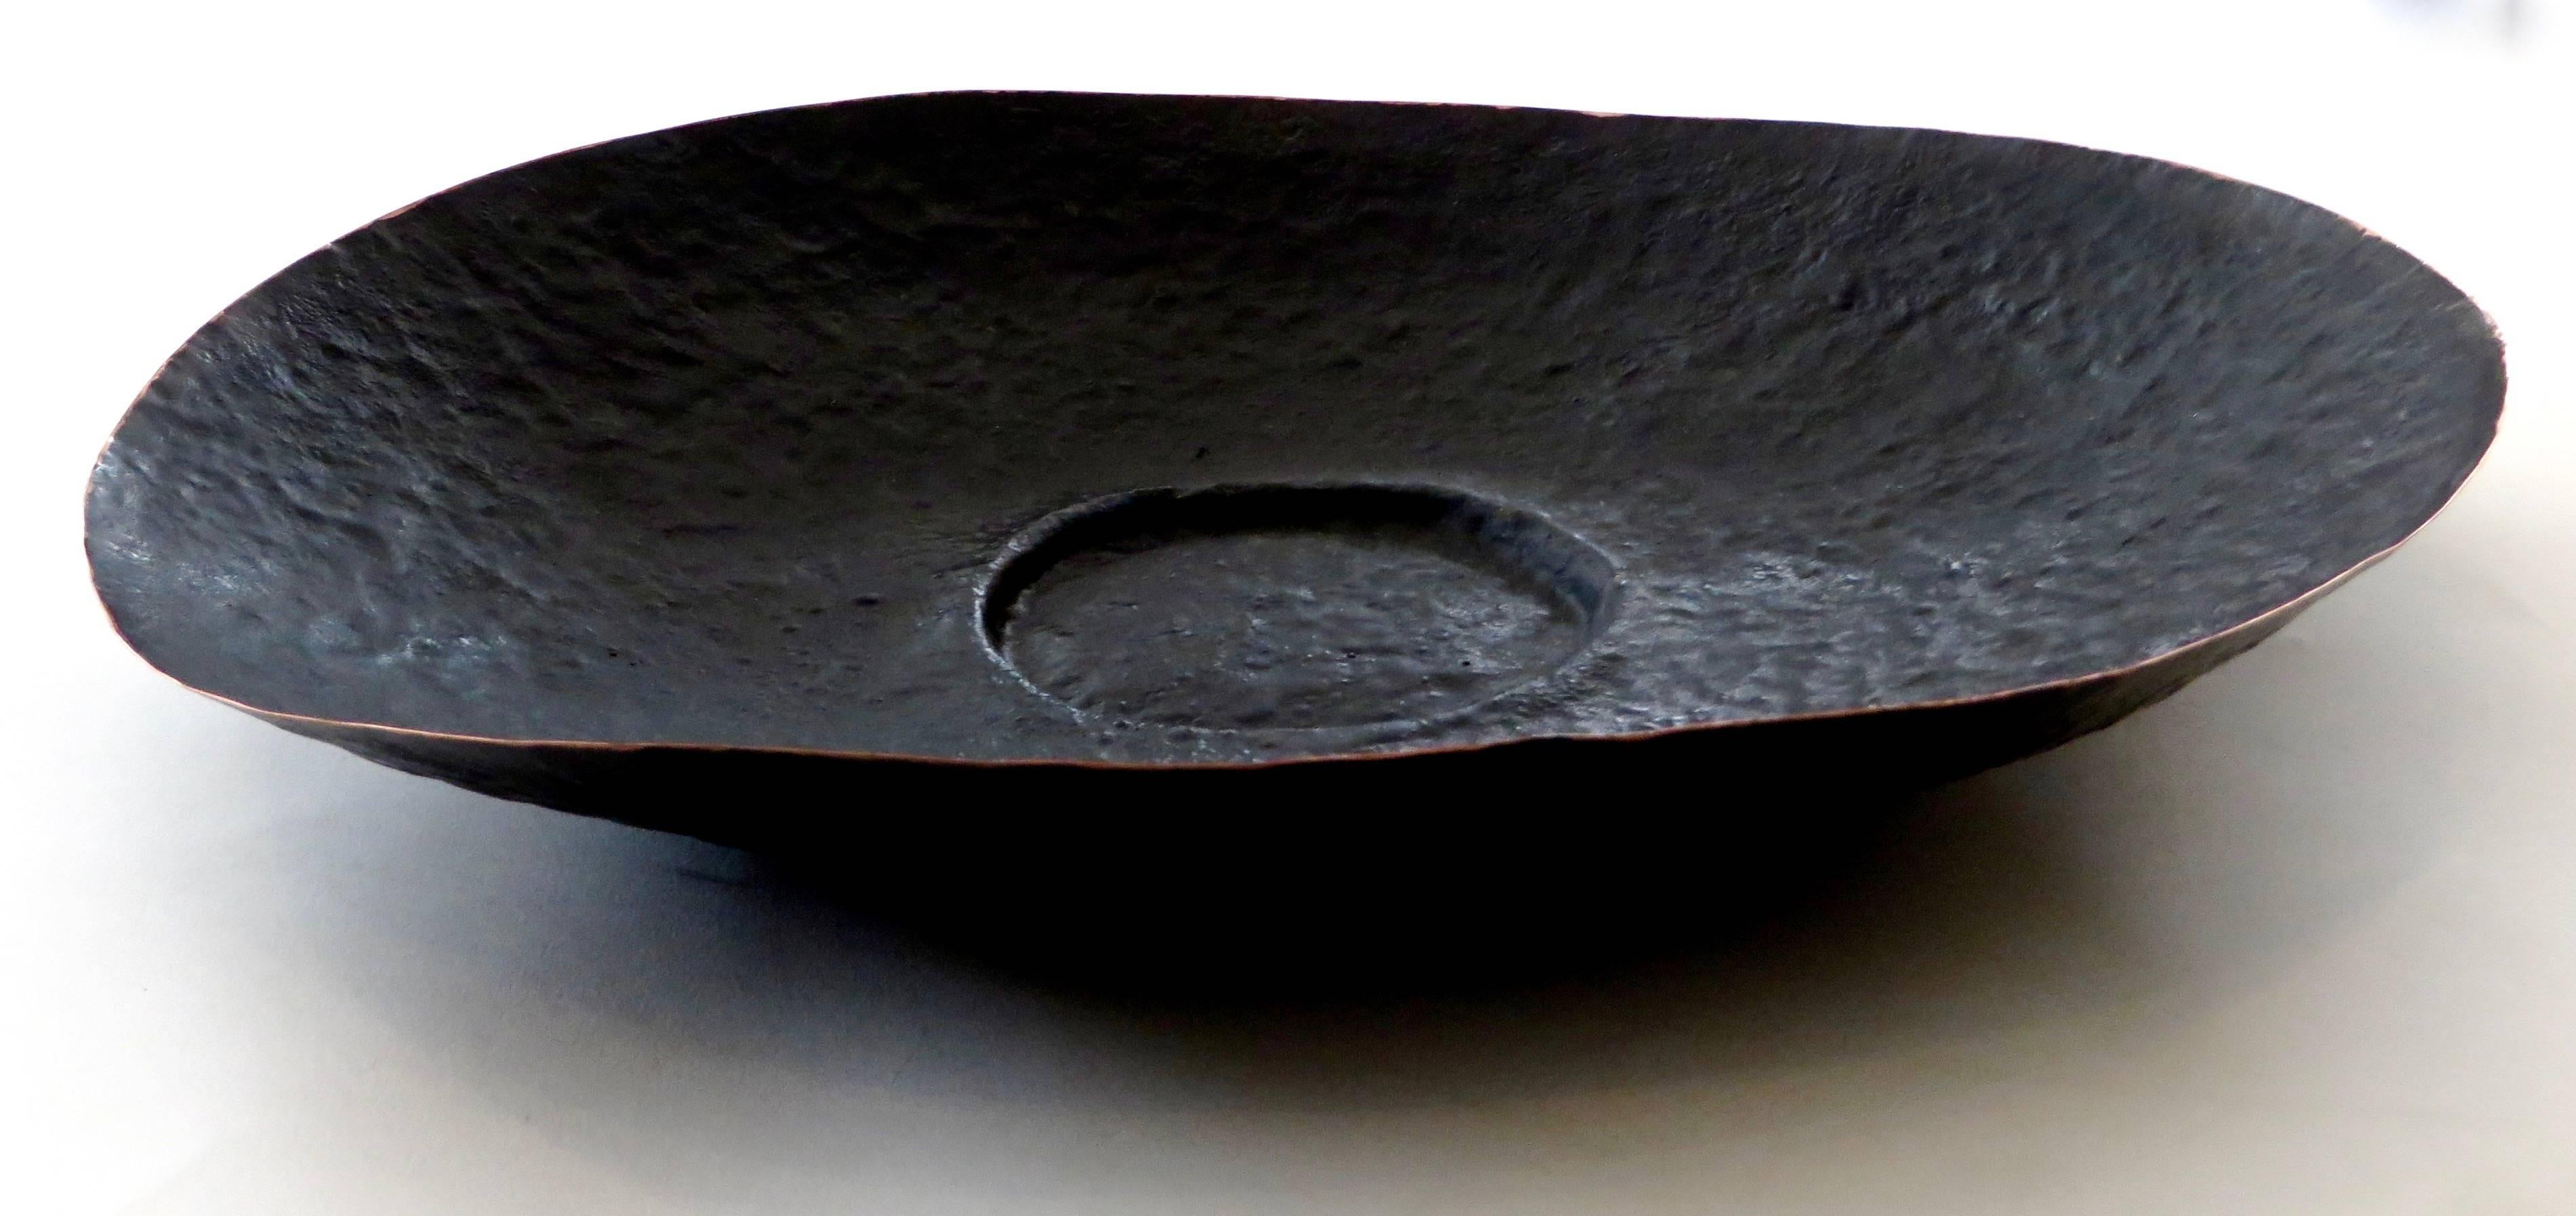 American Hand-Hammered Footed Sculptural Copper Bowl by Hvnter Gvtherer Poros Series